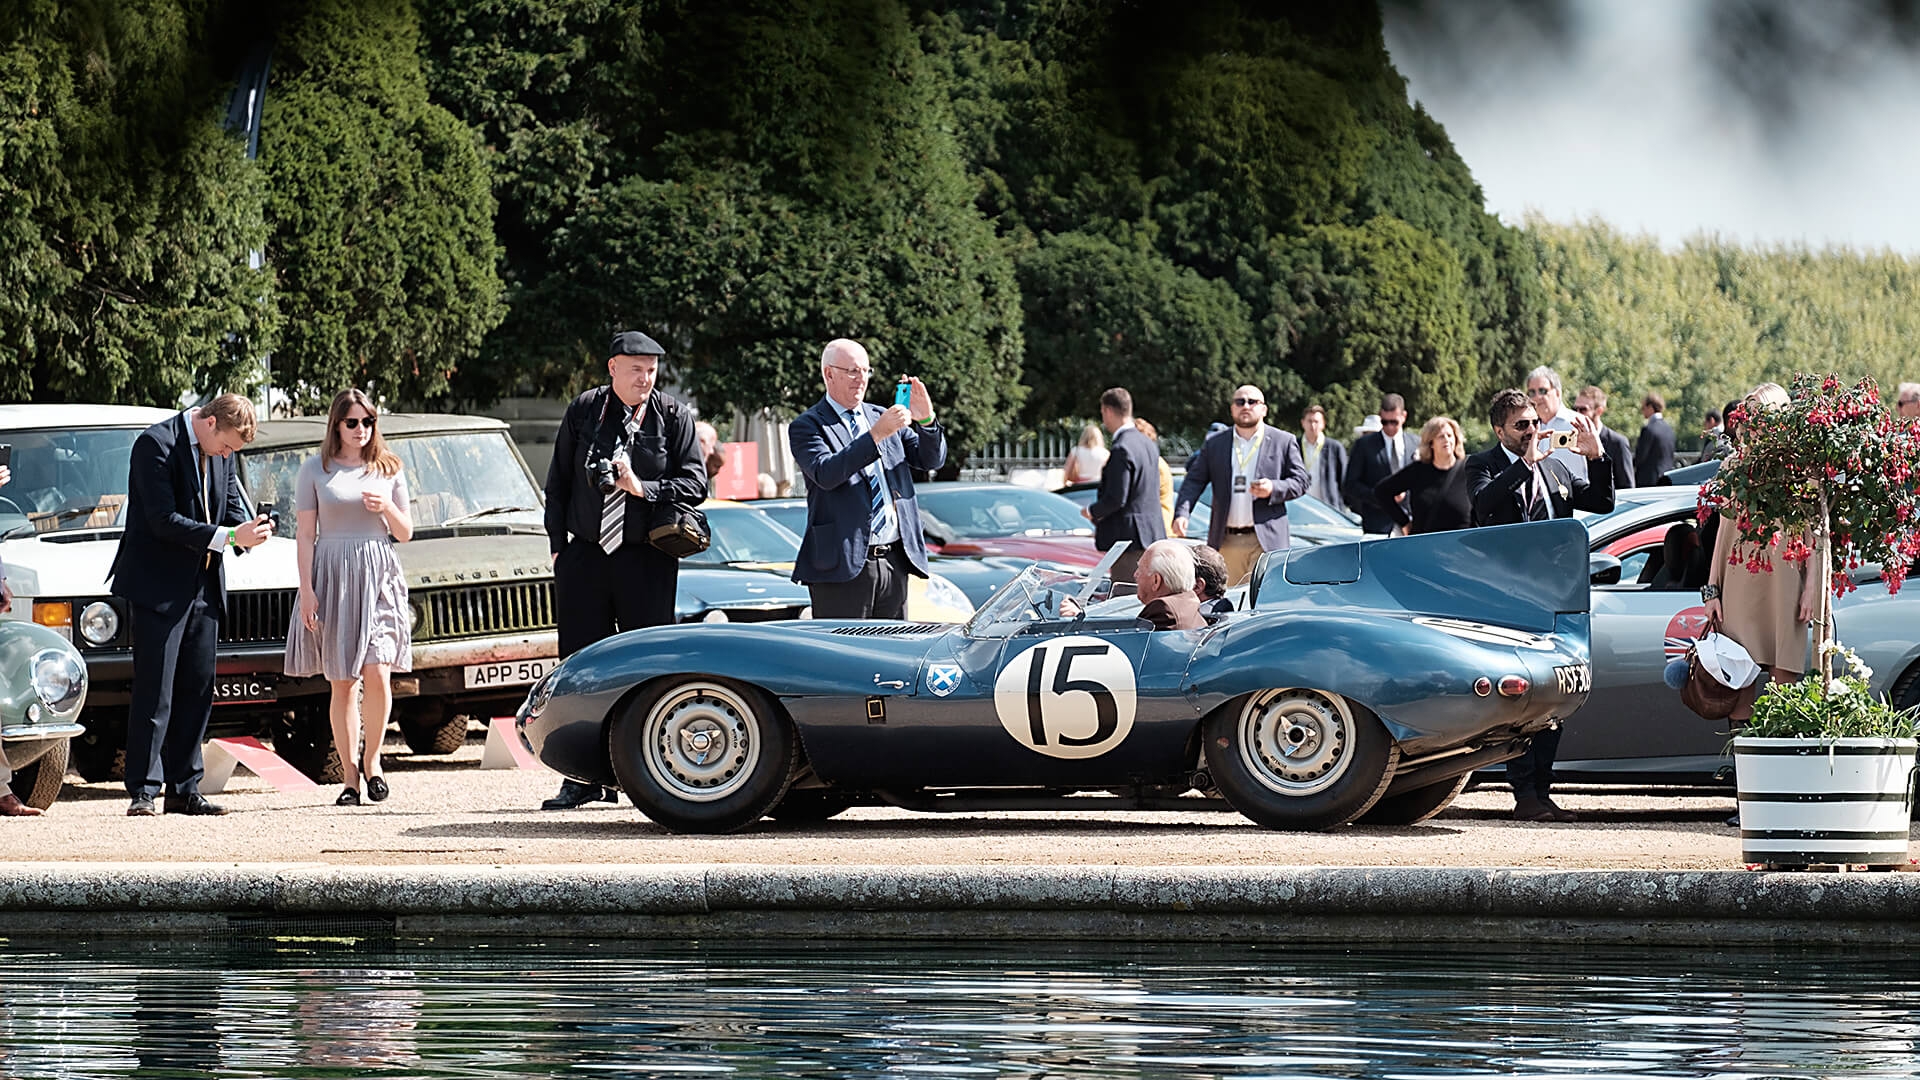 The 2017 Concours of Elegance